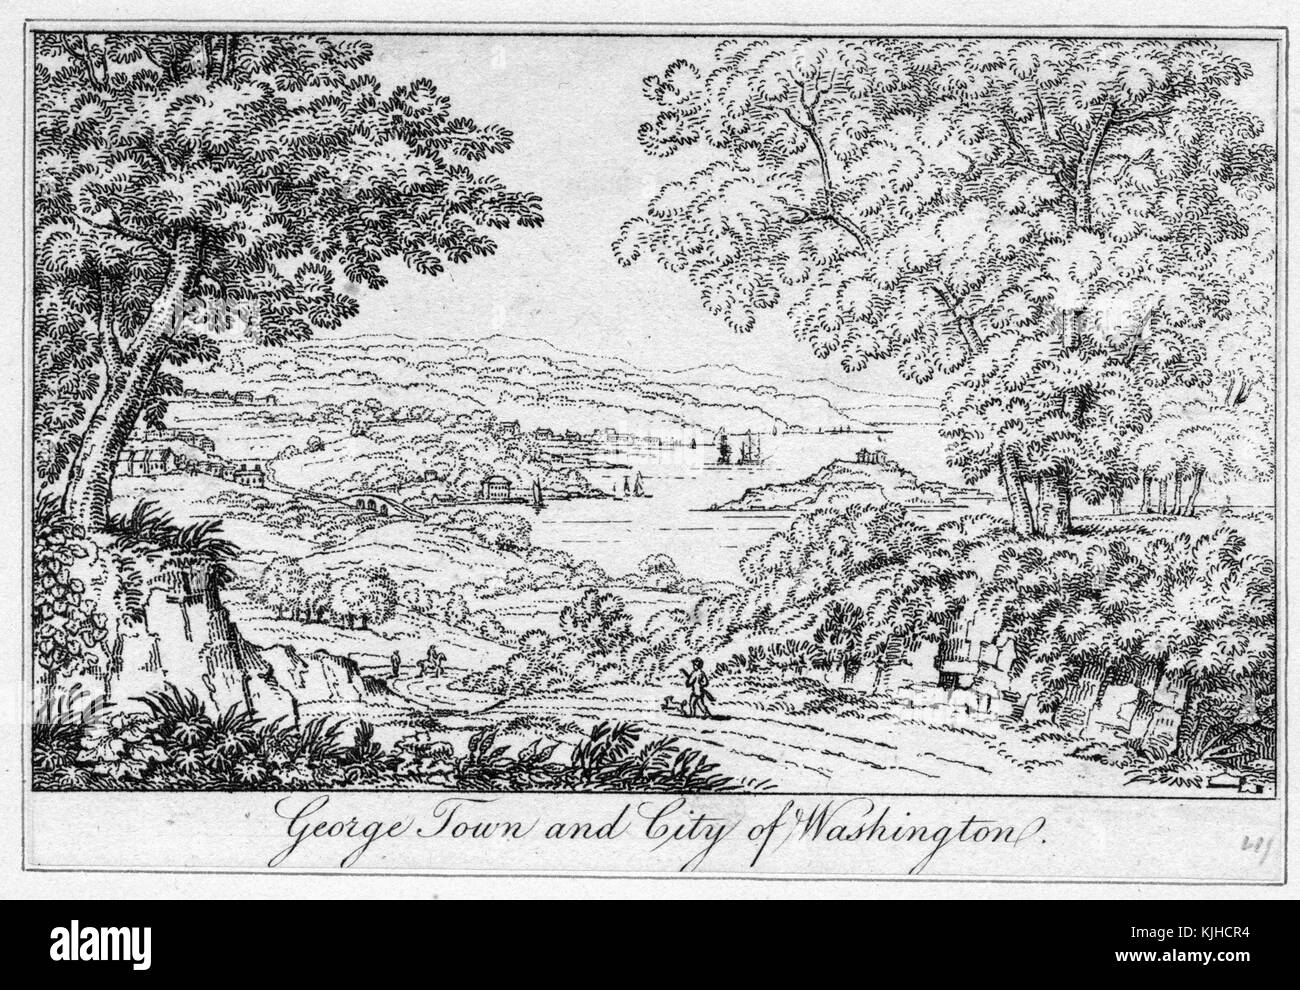 An engraving from a landscape of Georgetown and the City of Washington, the landscape mostly consists of rolling hills covered in open fields and trees, the Potomac River cuts through the middle of scenery, Washington, DC, 1832. From the New York Public Library. Stock Photo